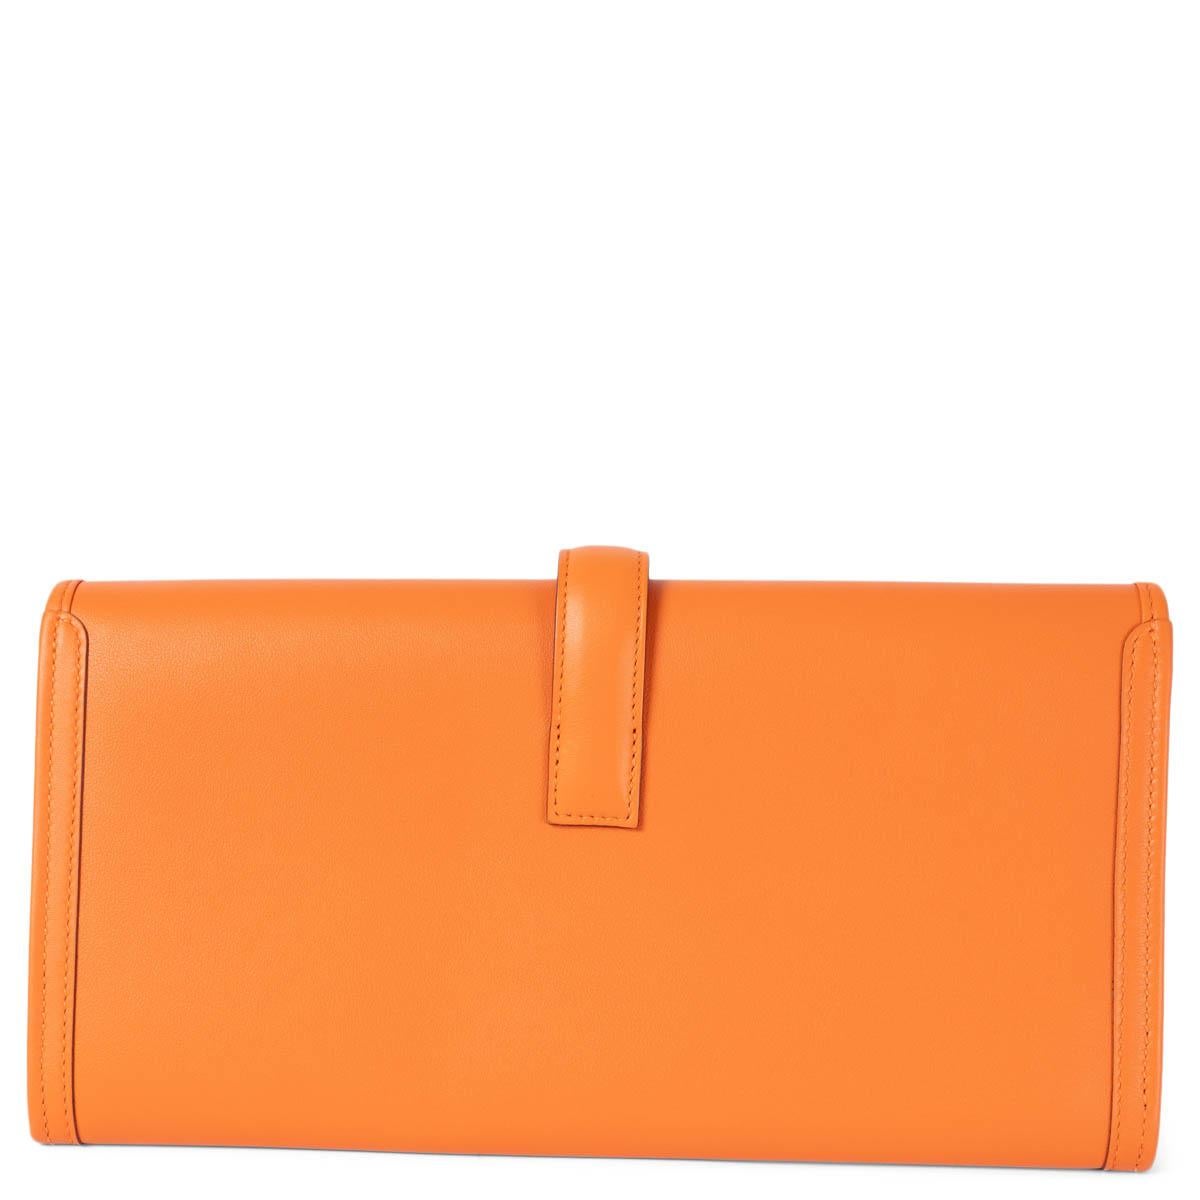 HERMES orange Swift leather JIGE 29 Clutch Bag In Excellent Condition For Sale In Zürich, CH